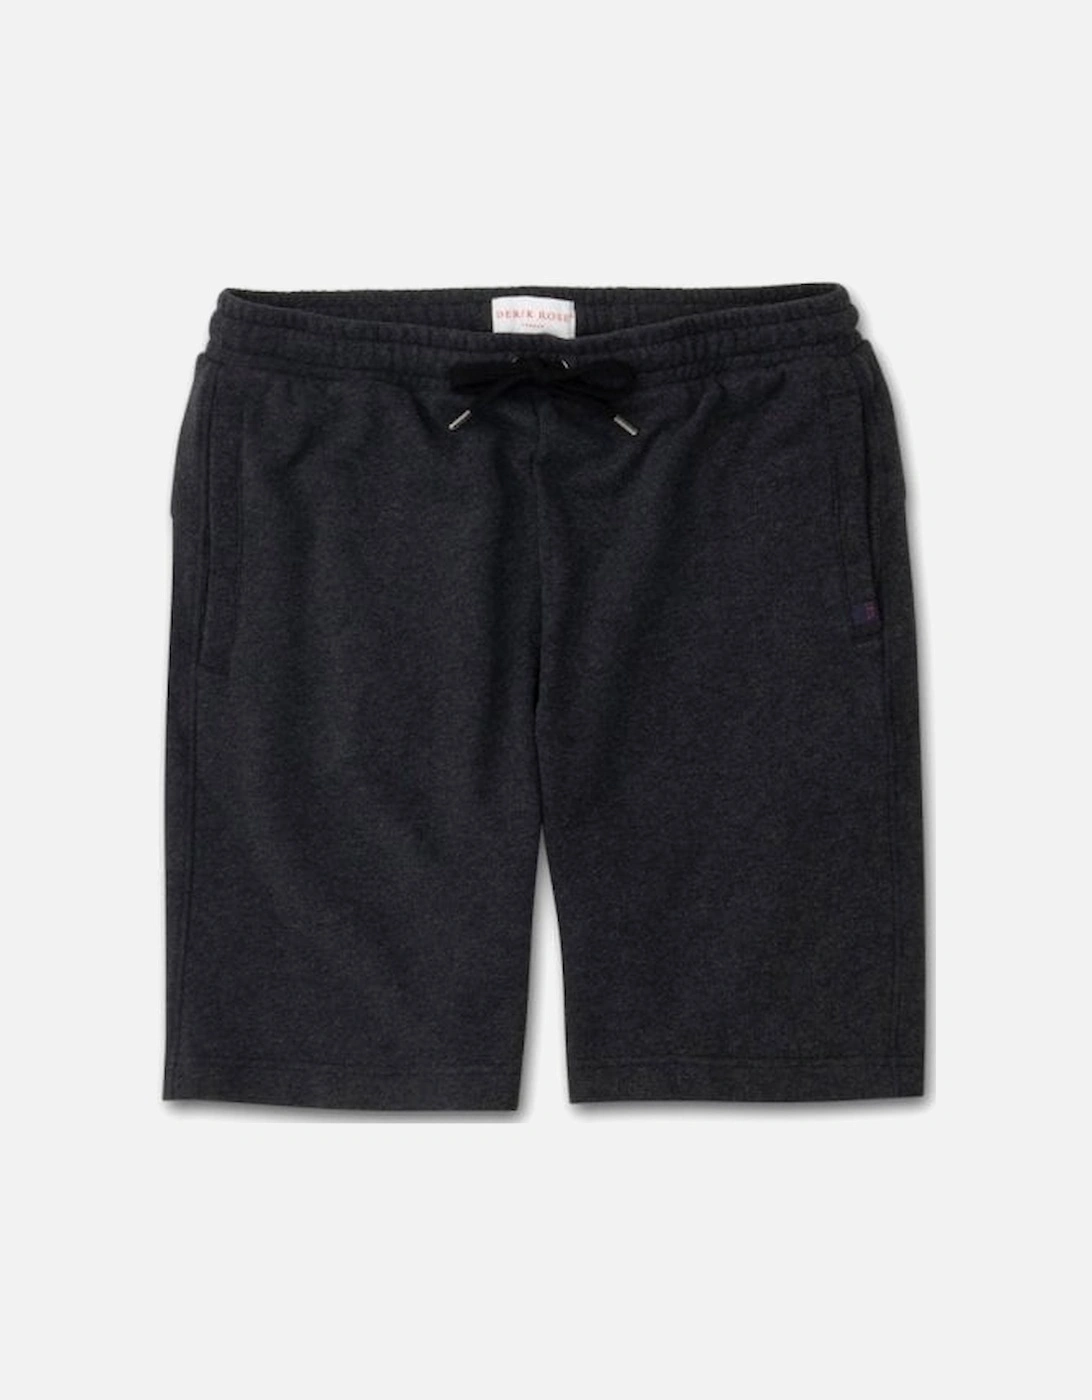 Devon Luxe Track Shorts, Charcoal, 7 of 6